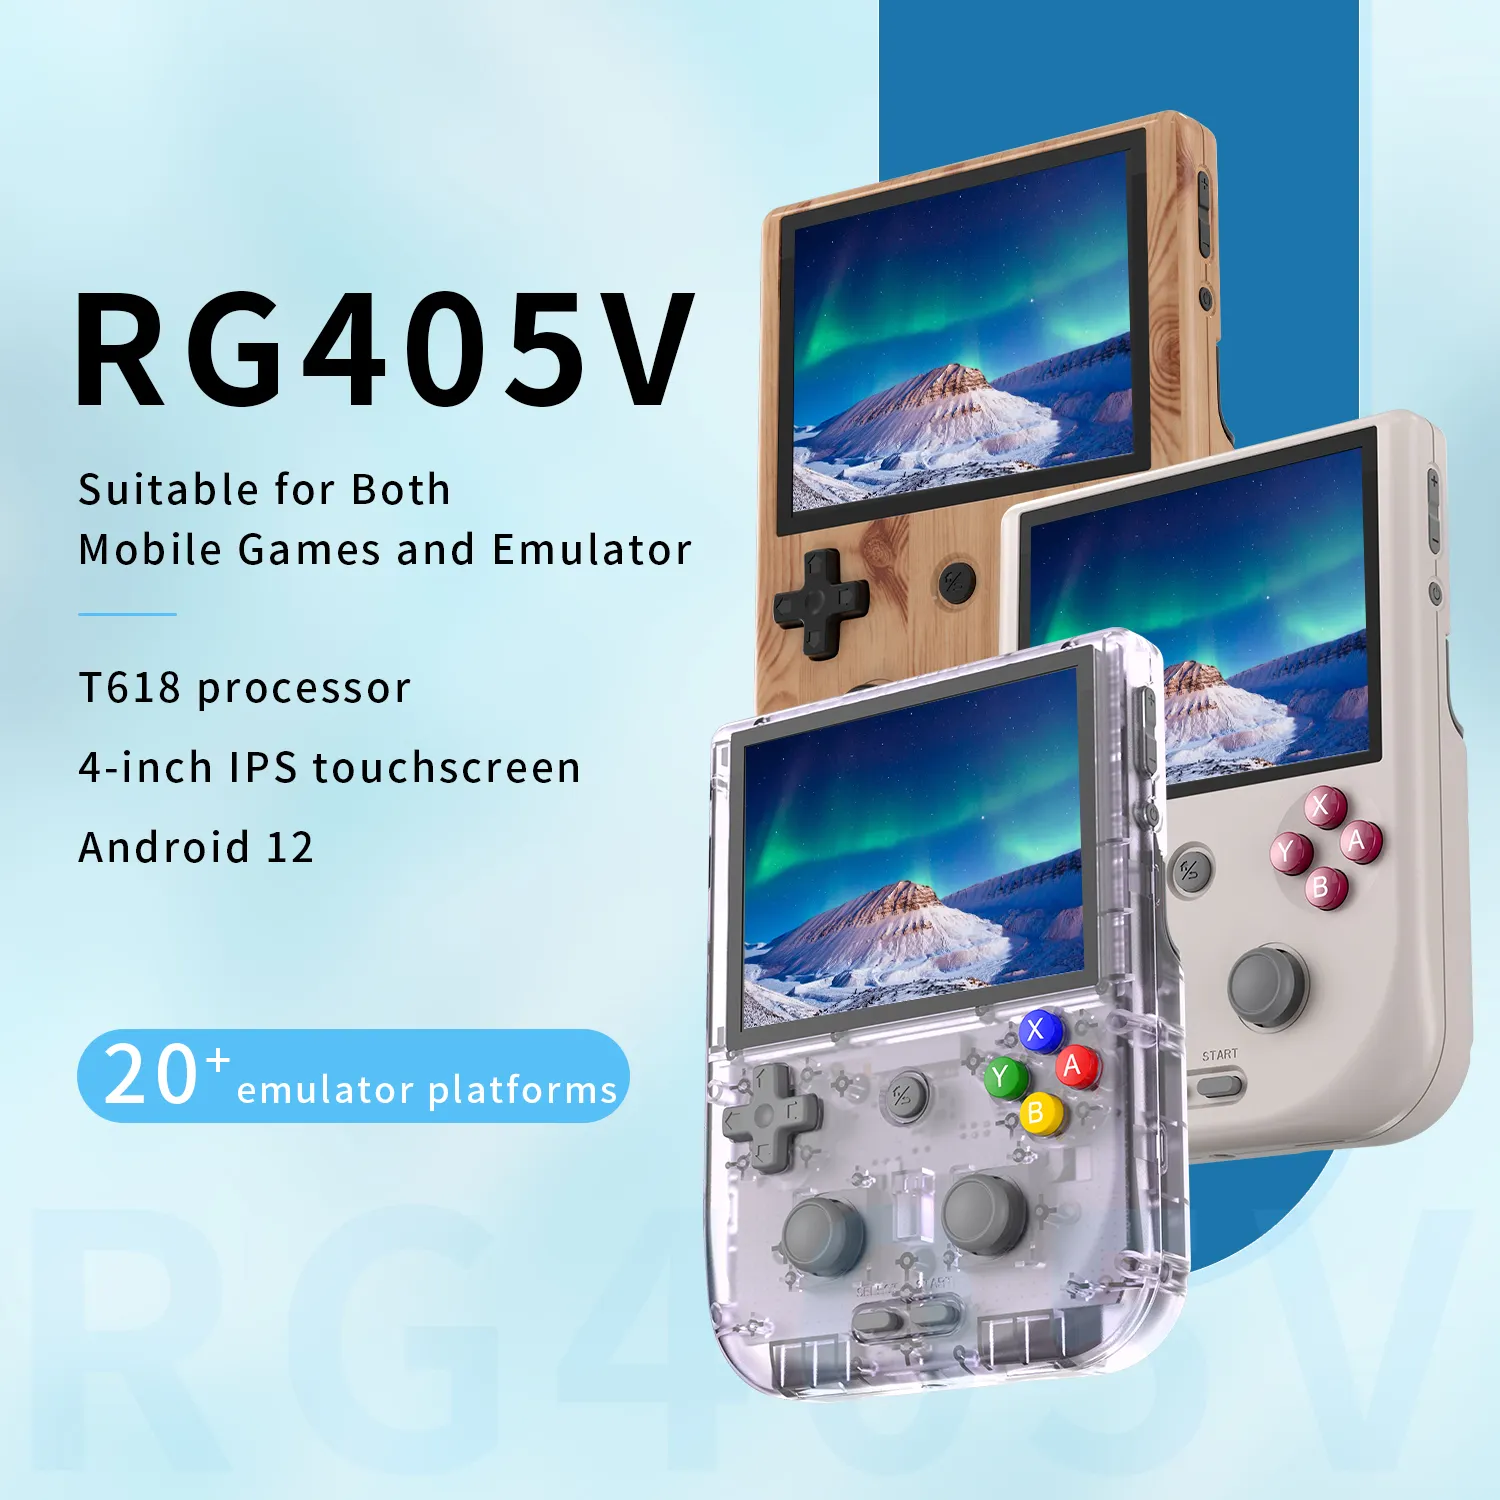 Rg405v Handheld Console Games Download 4-Inch Ips Touch Screen Built-In Hall Joystick Smart Game Player